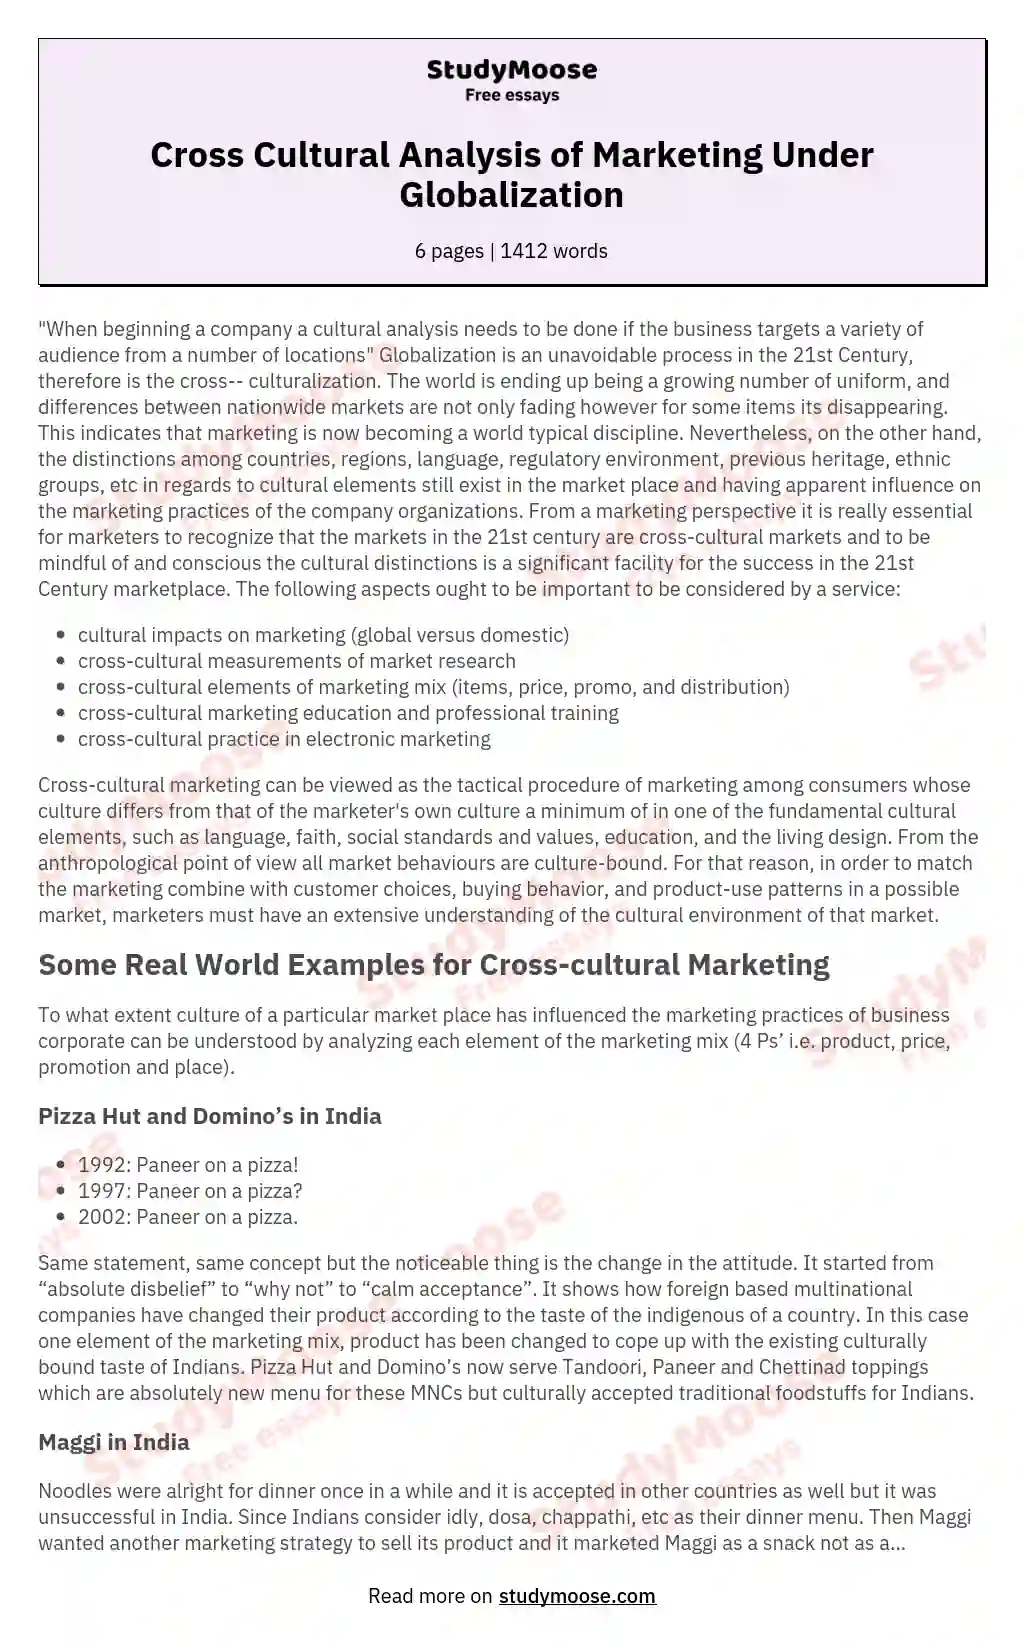 Cross Cultural Analysis of Marketing Under Globalization essay